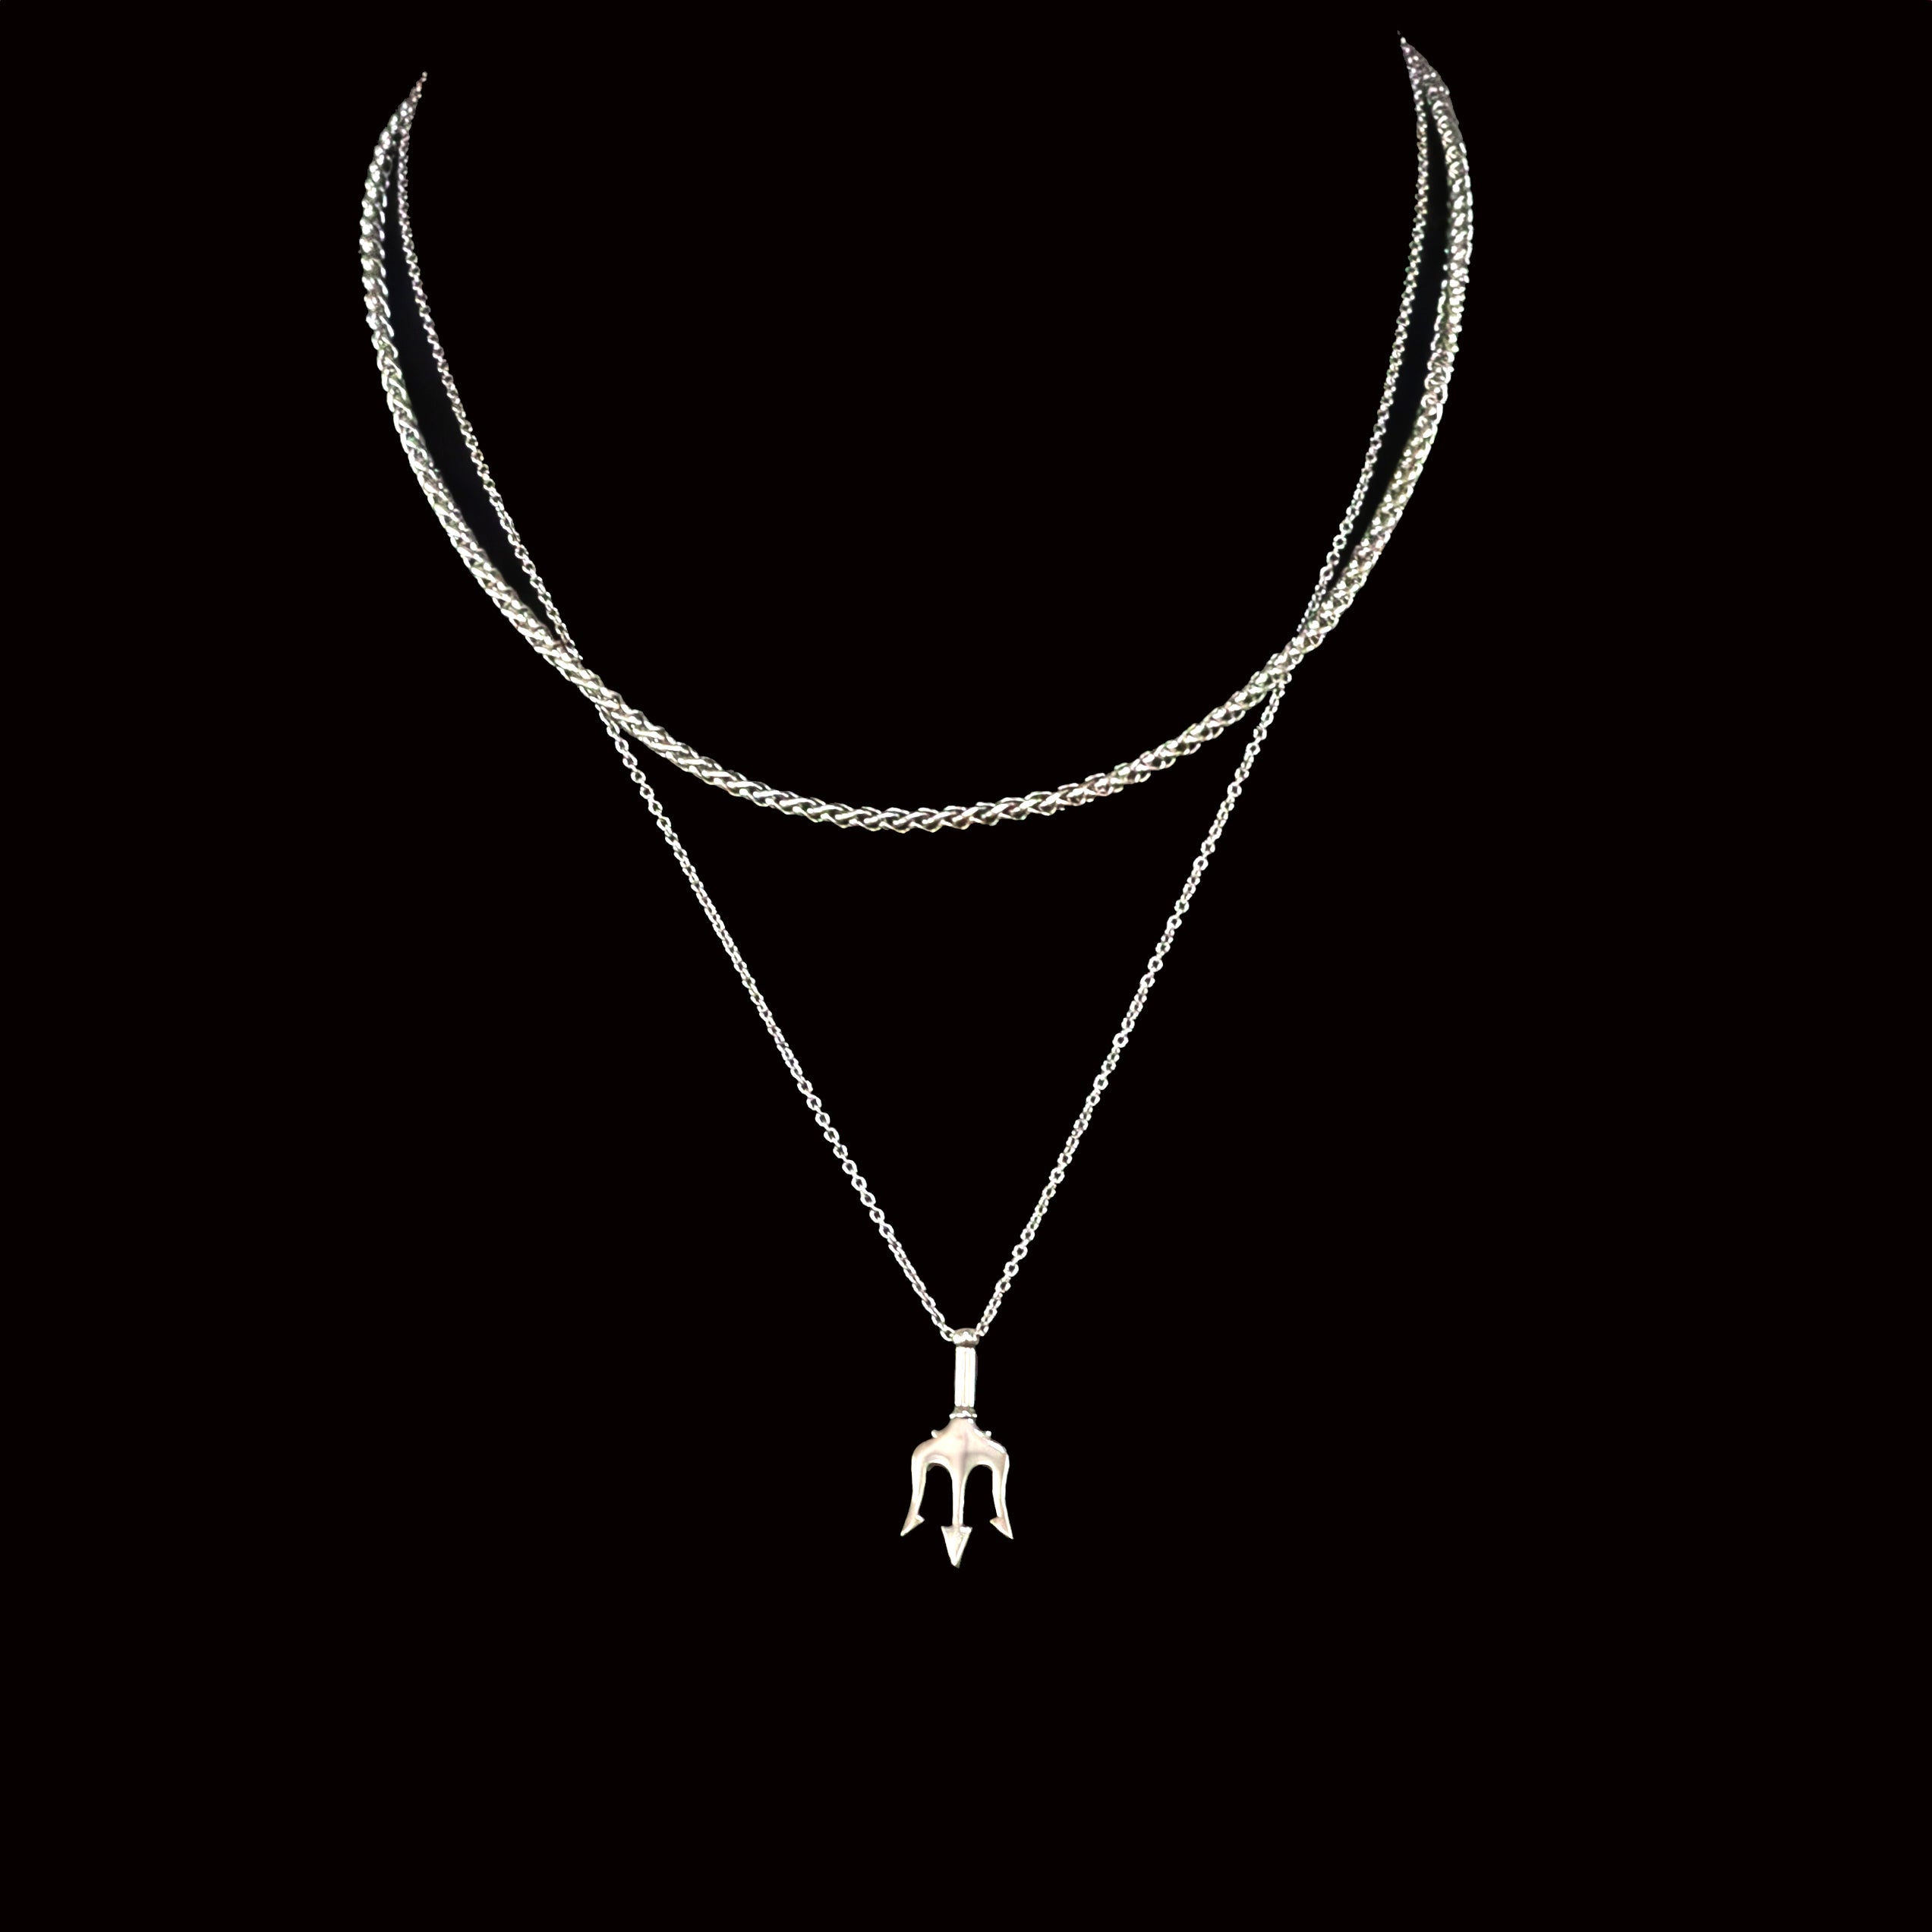 Ludvigs Stainless Steel Trident Pendant with Cable Chain Necklace